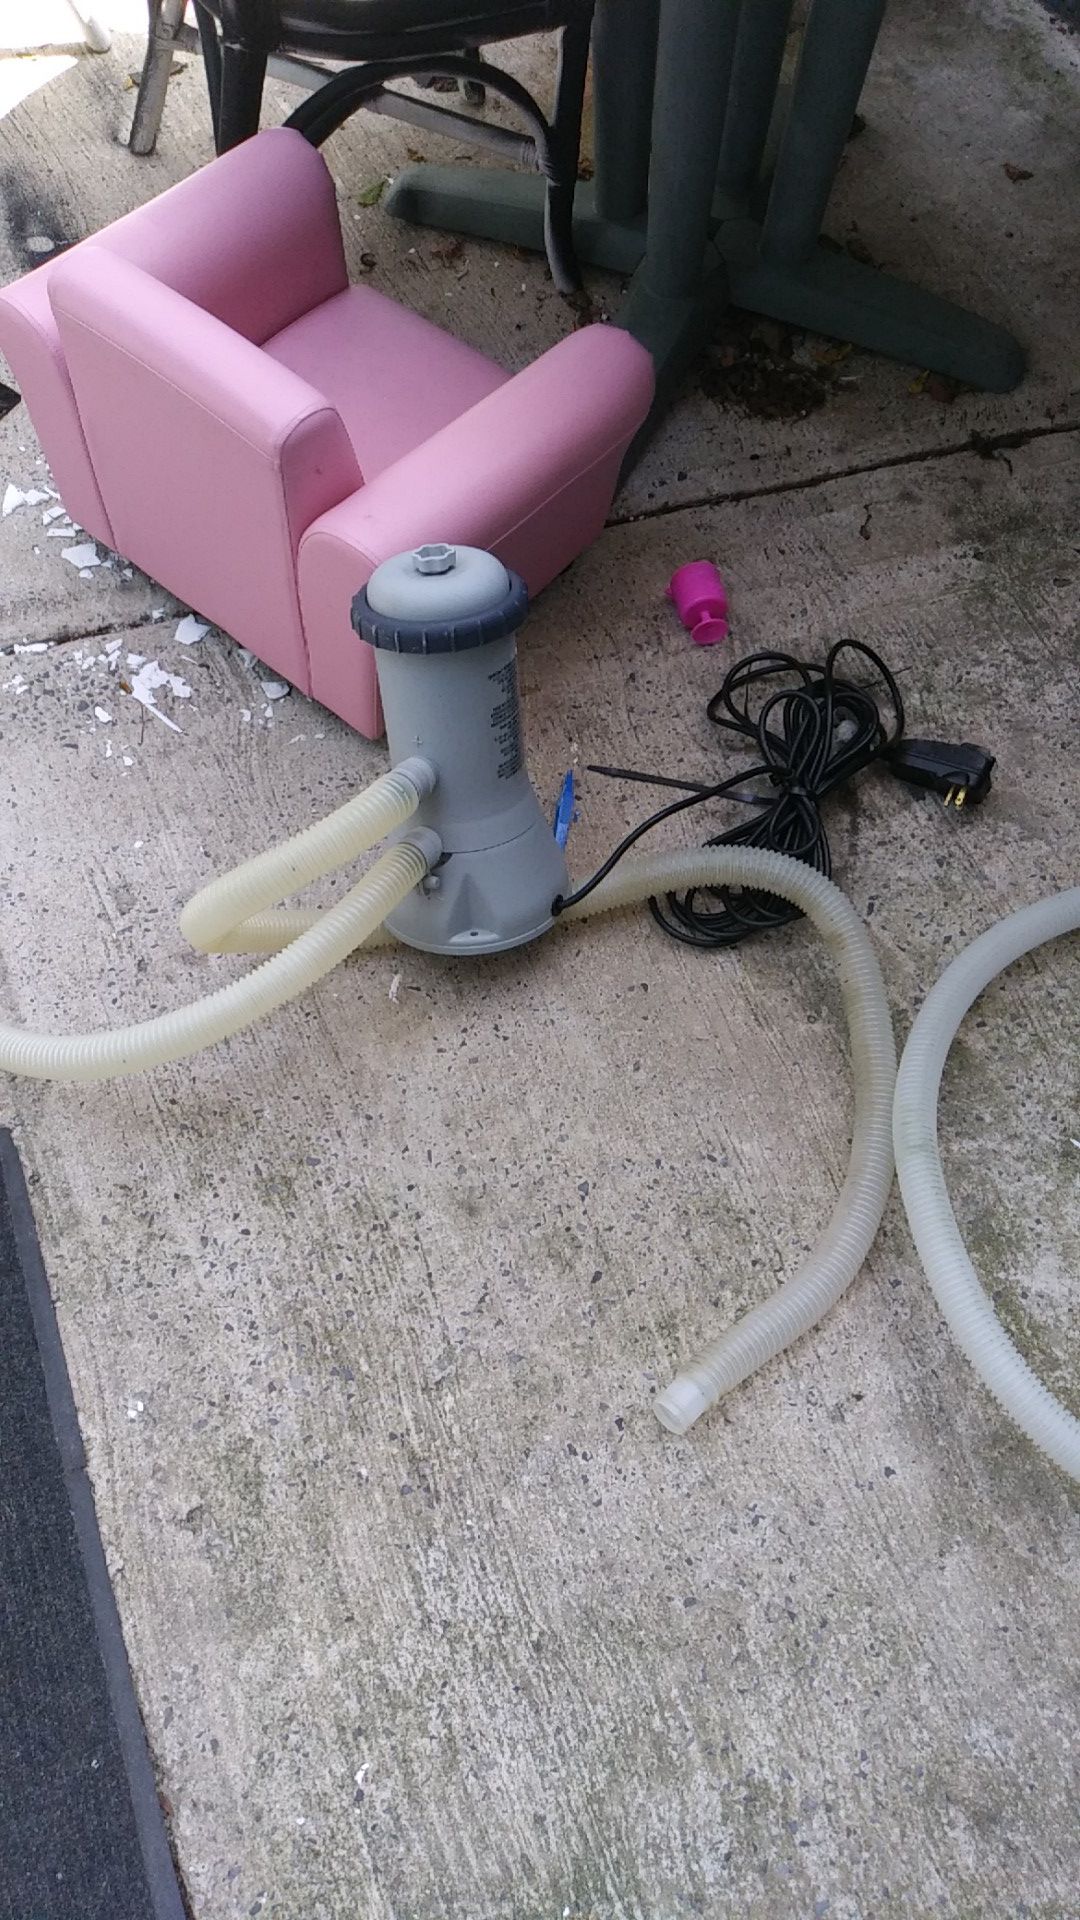 Water pump for swimming pool